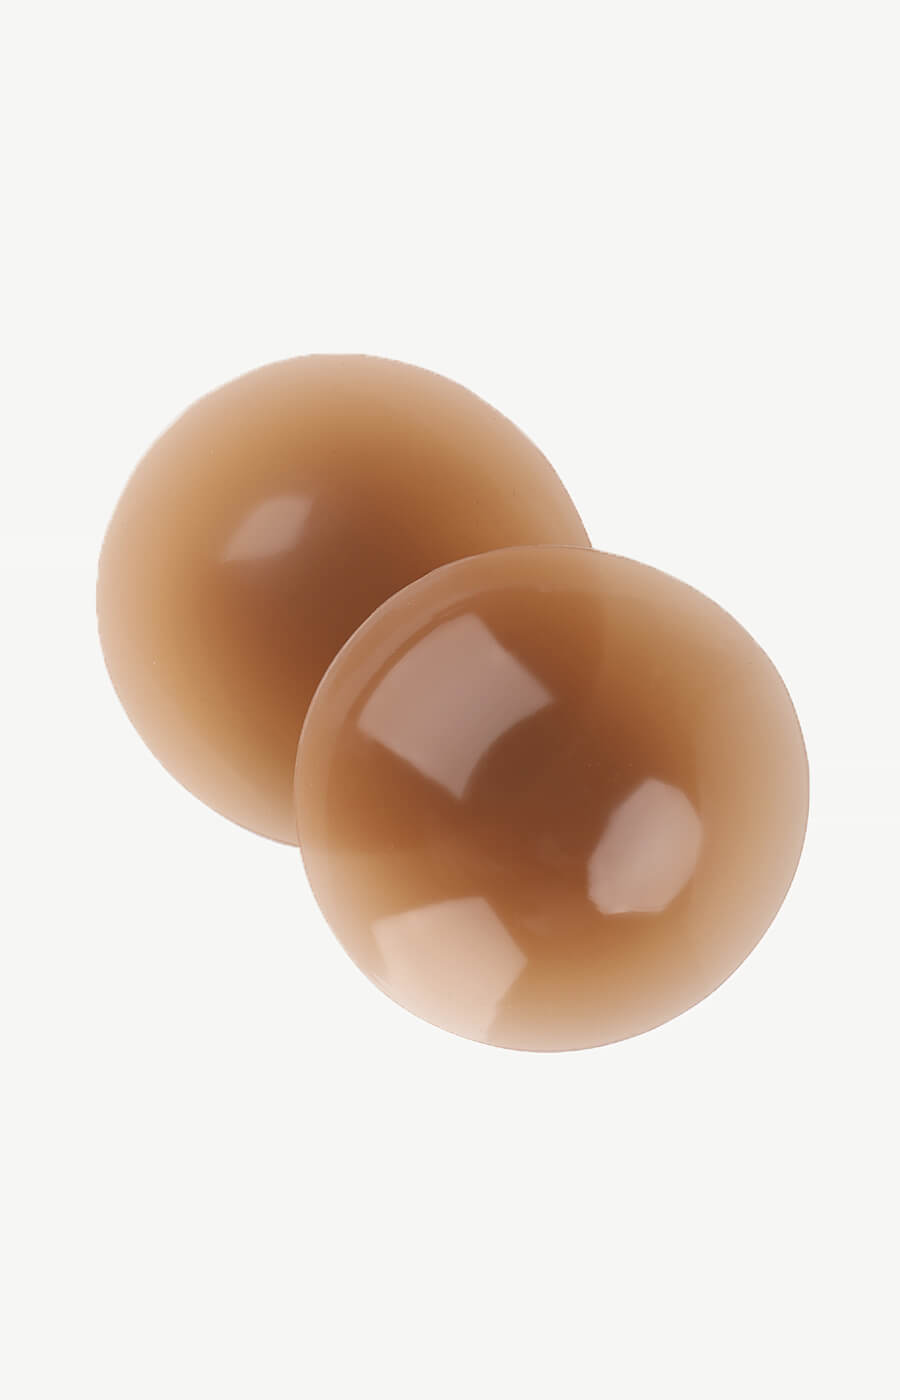 Go Braless Silicone Nipple Covers